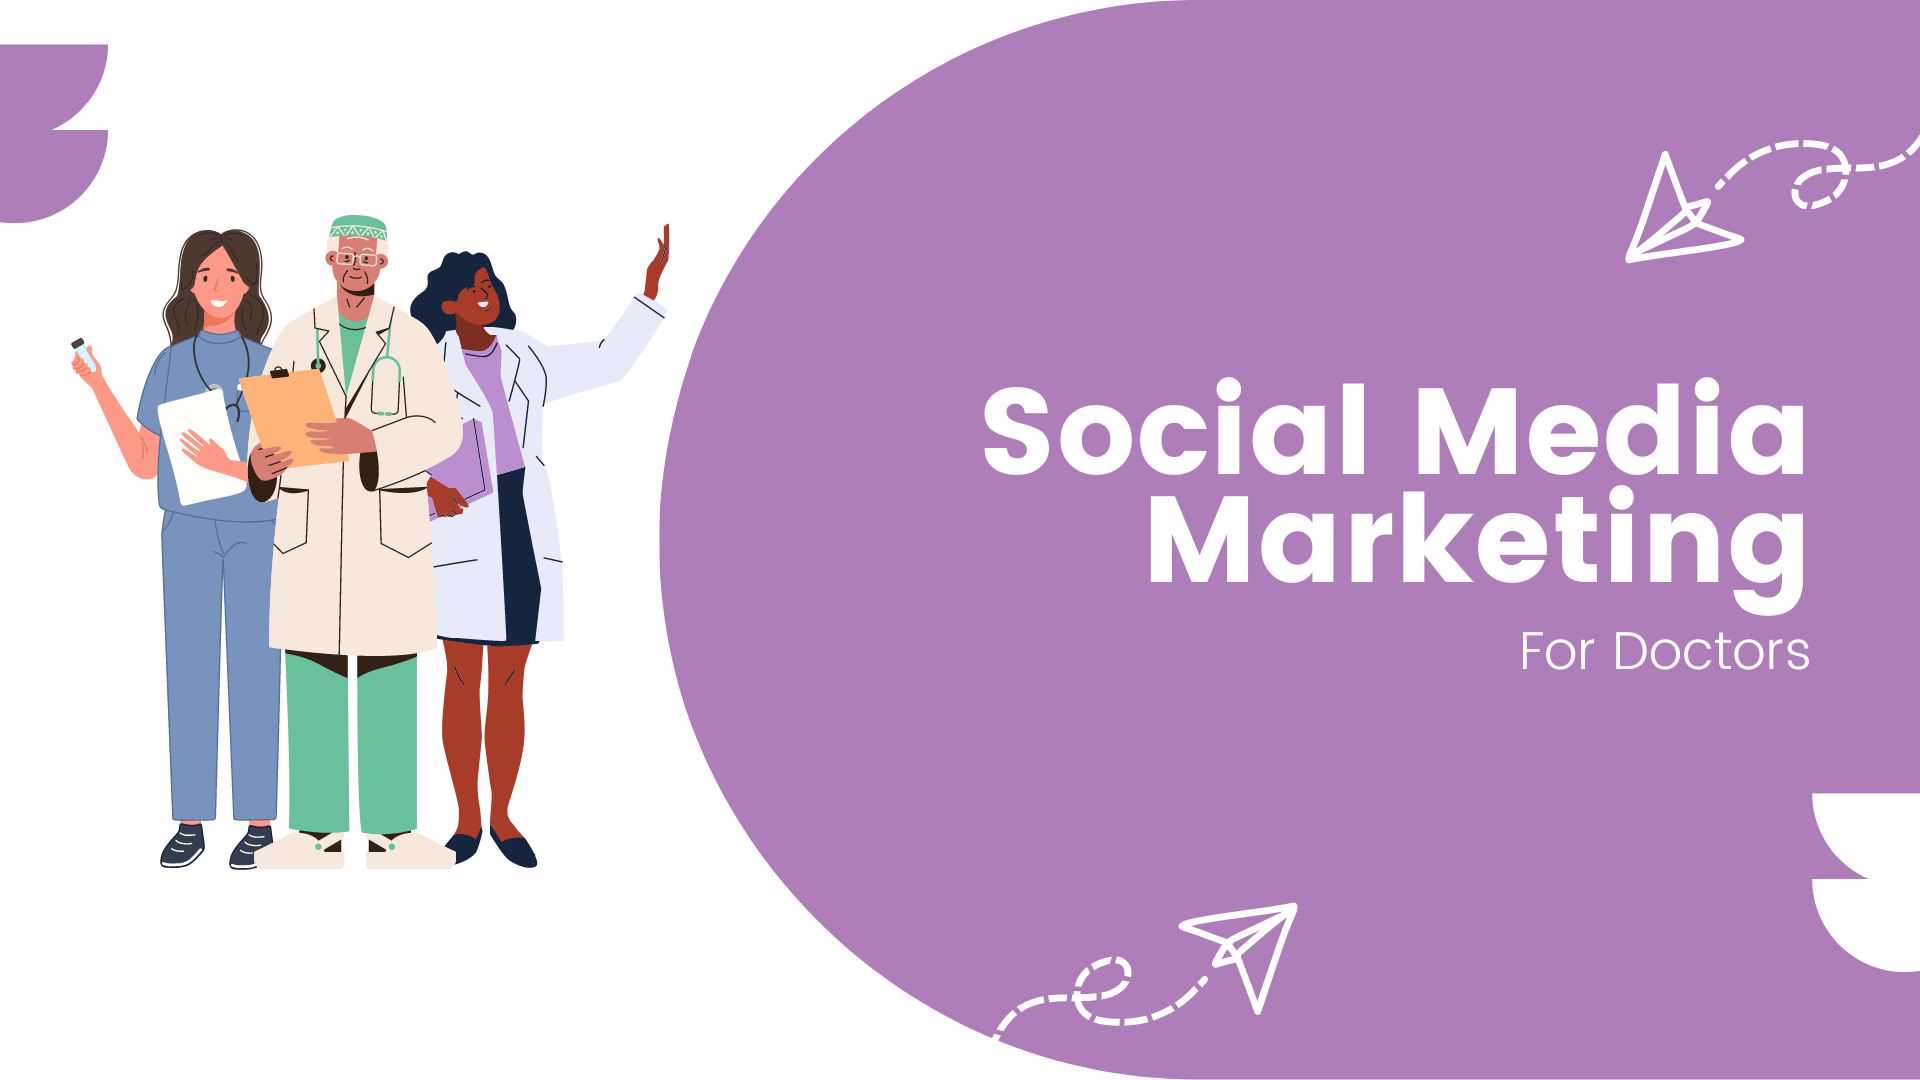 Social Media Marketing for Doctors: Strategies and Steps